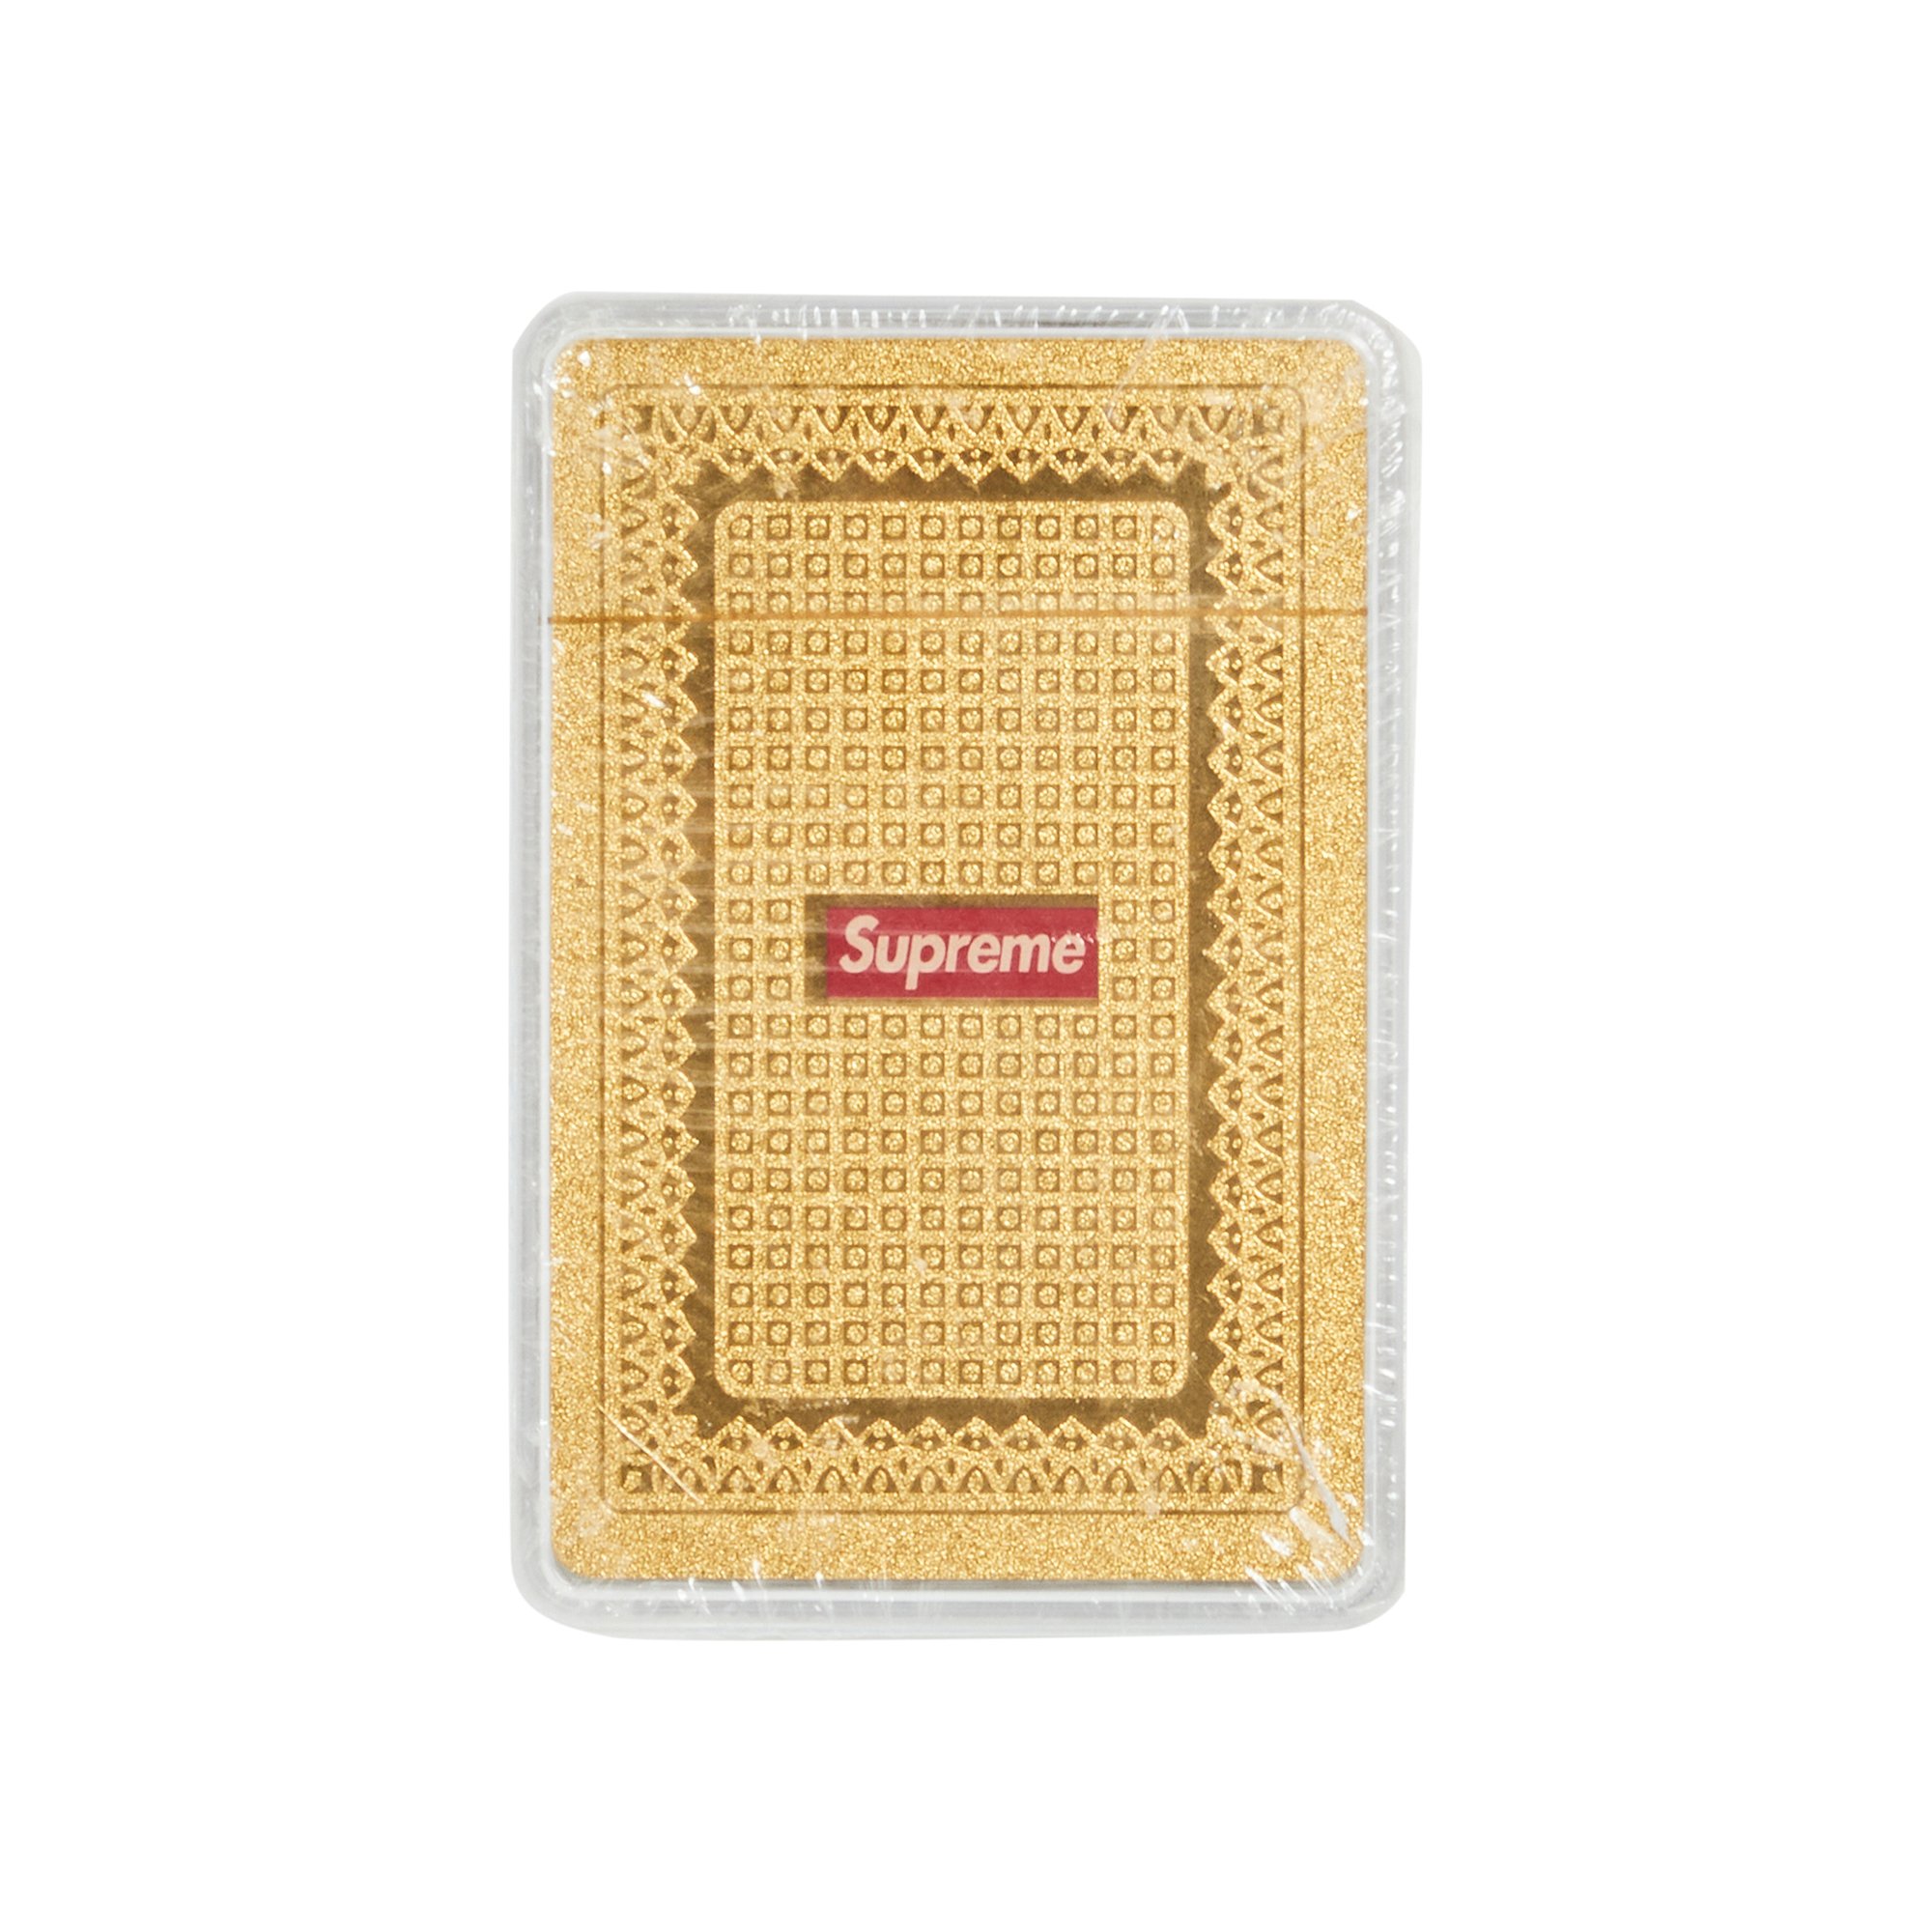 Buy Pre-Owned Supreme Poker Cards 'Gold' - FW13POKER GOLD | GOAT